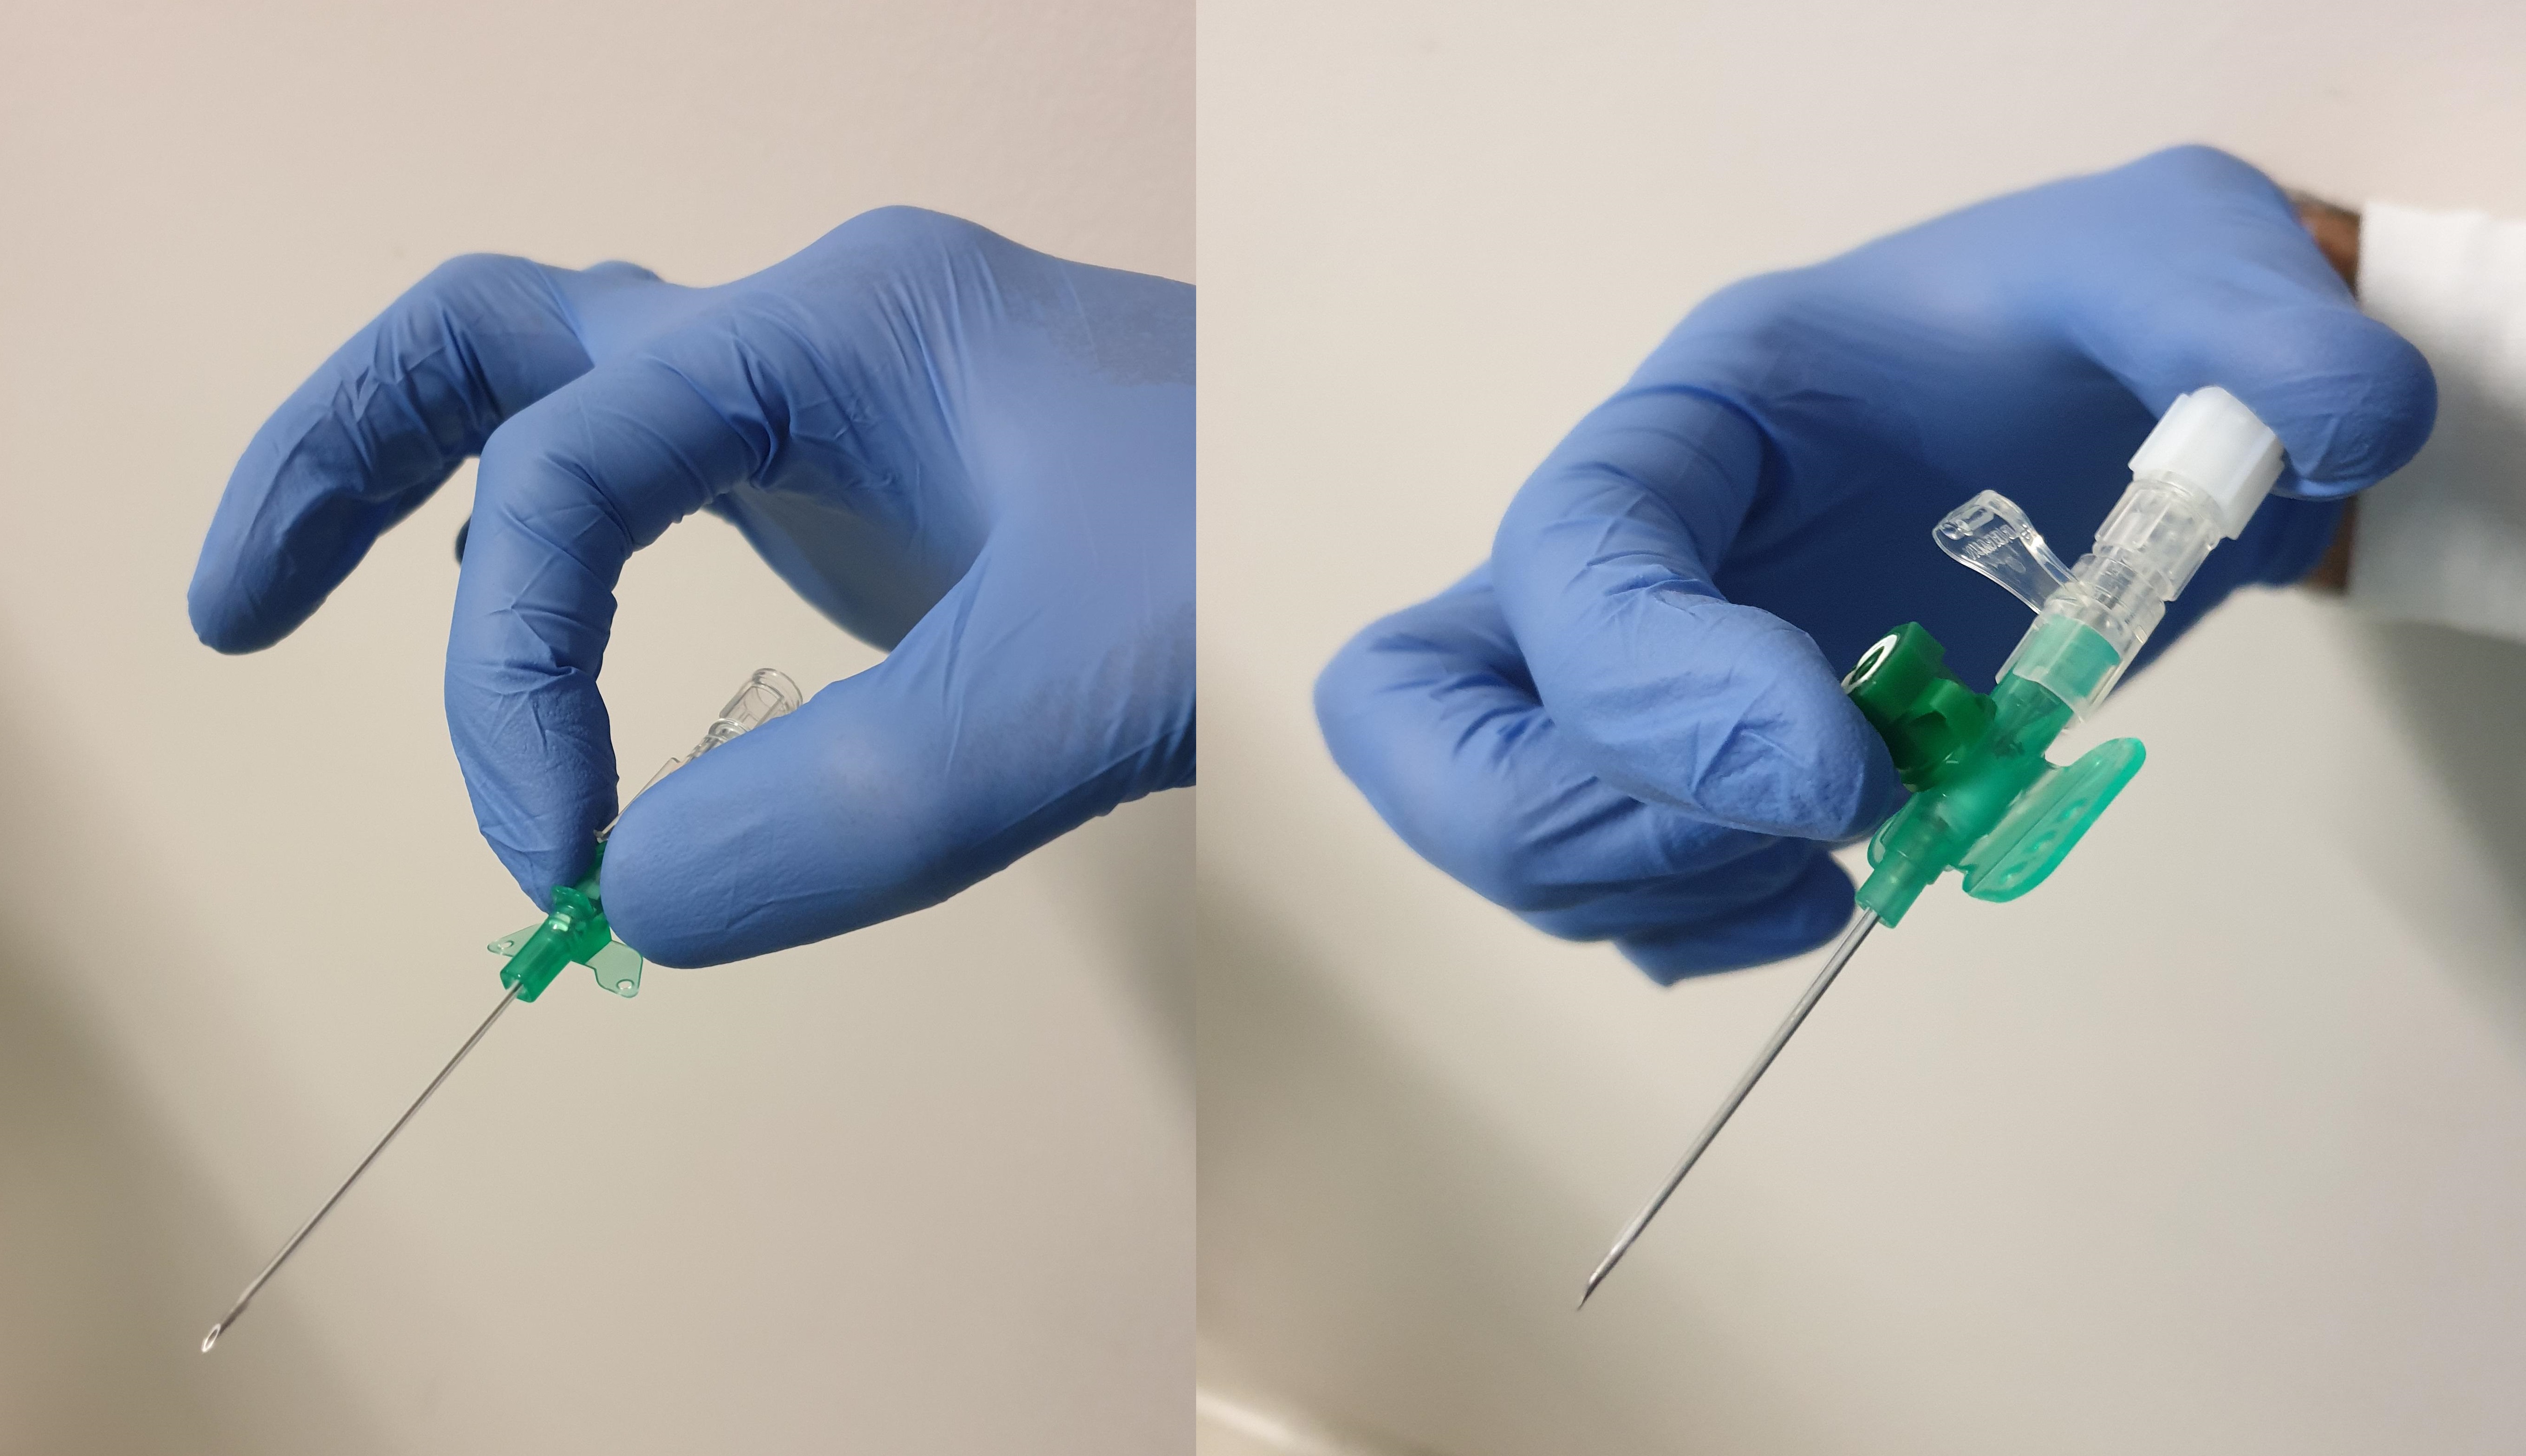 Demonstration of two ways in which a peripheral line can be held during insertion